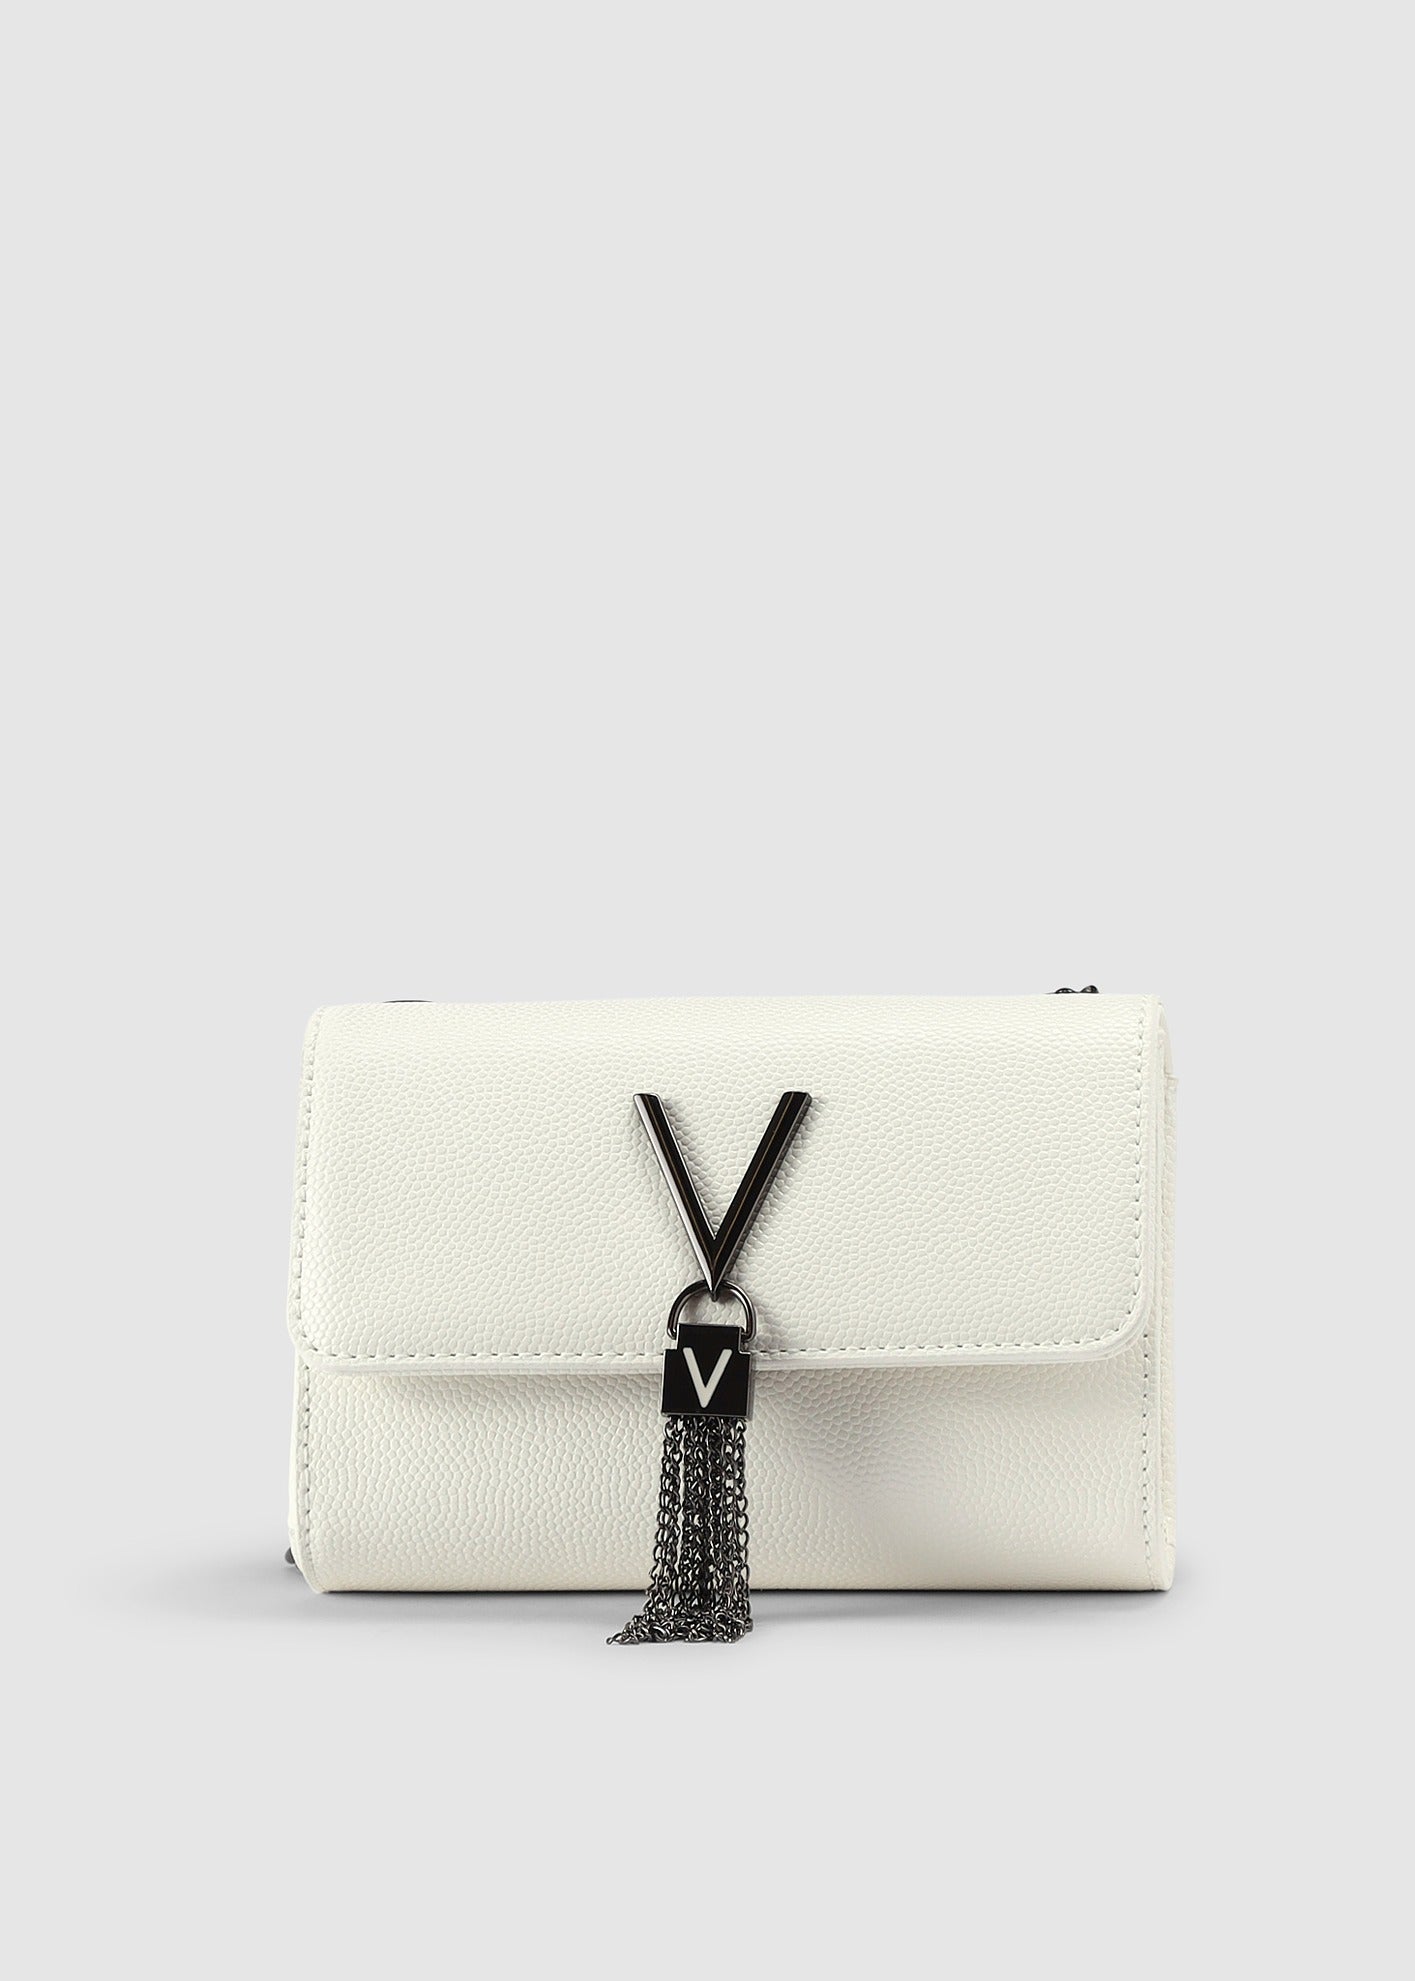 Image of Valentino Bags Womens Divina Small Fold Over Clutch Bag With Chain Strap In Bianco/Gunmetal